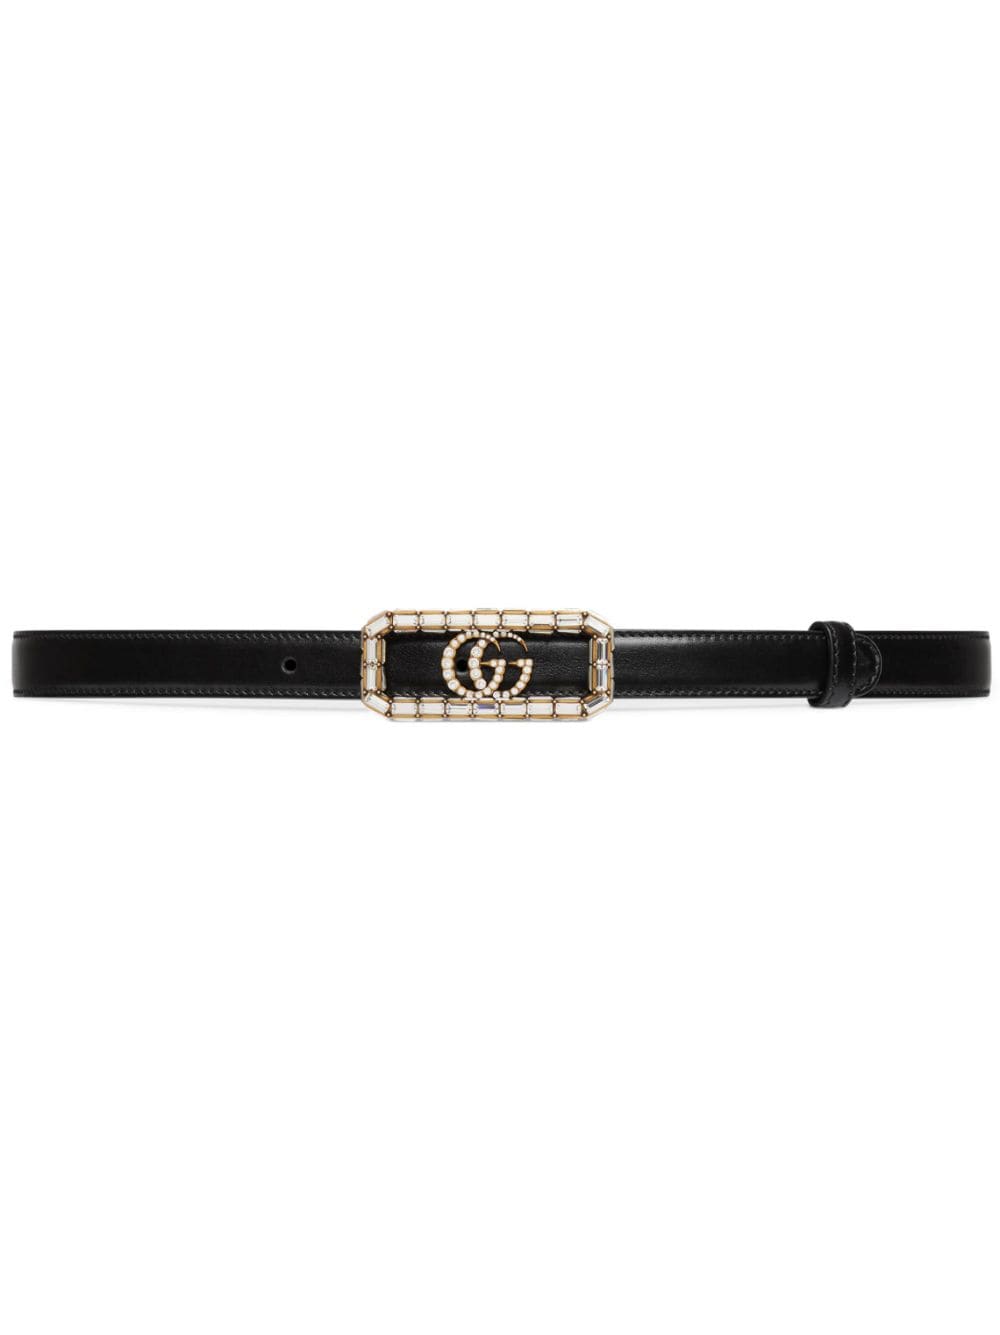 Luxurious Black Leather Belt with Crystal-Embellished Double G Logo Buckle